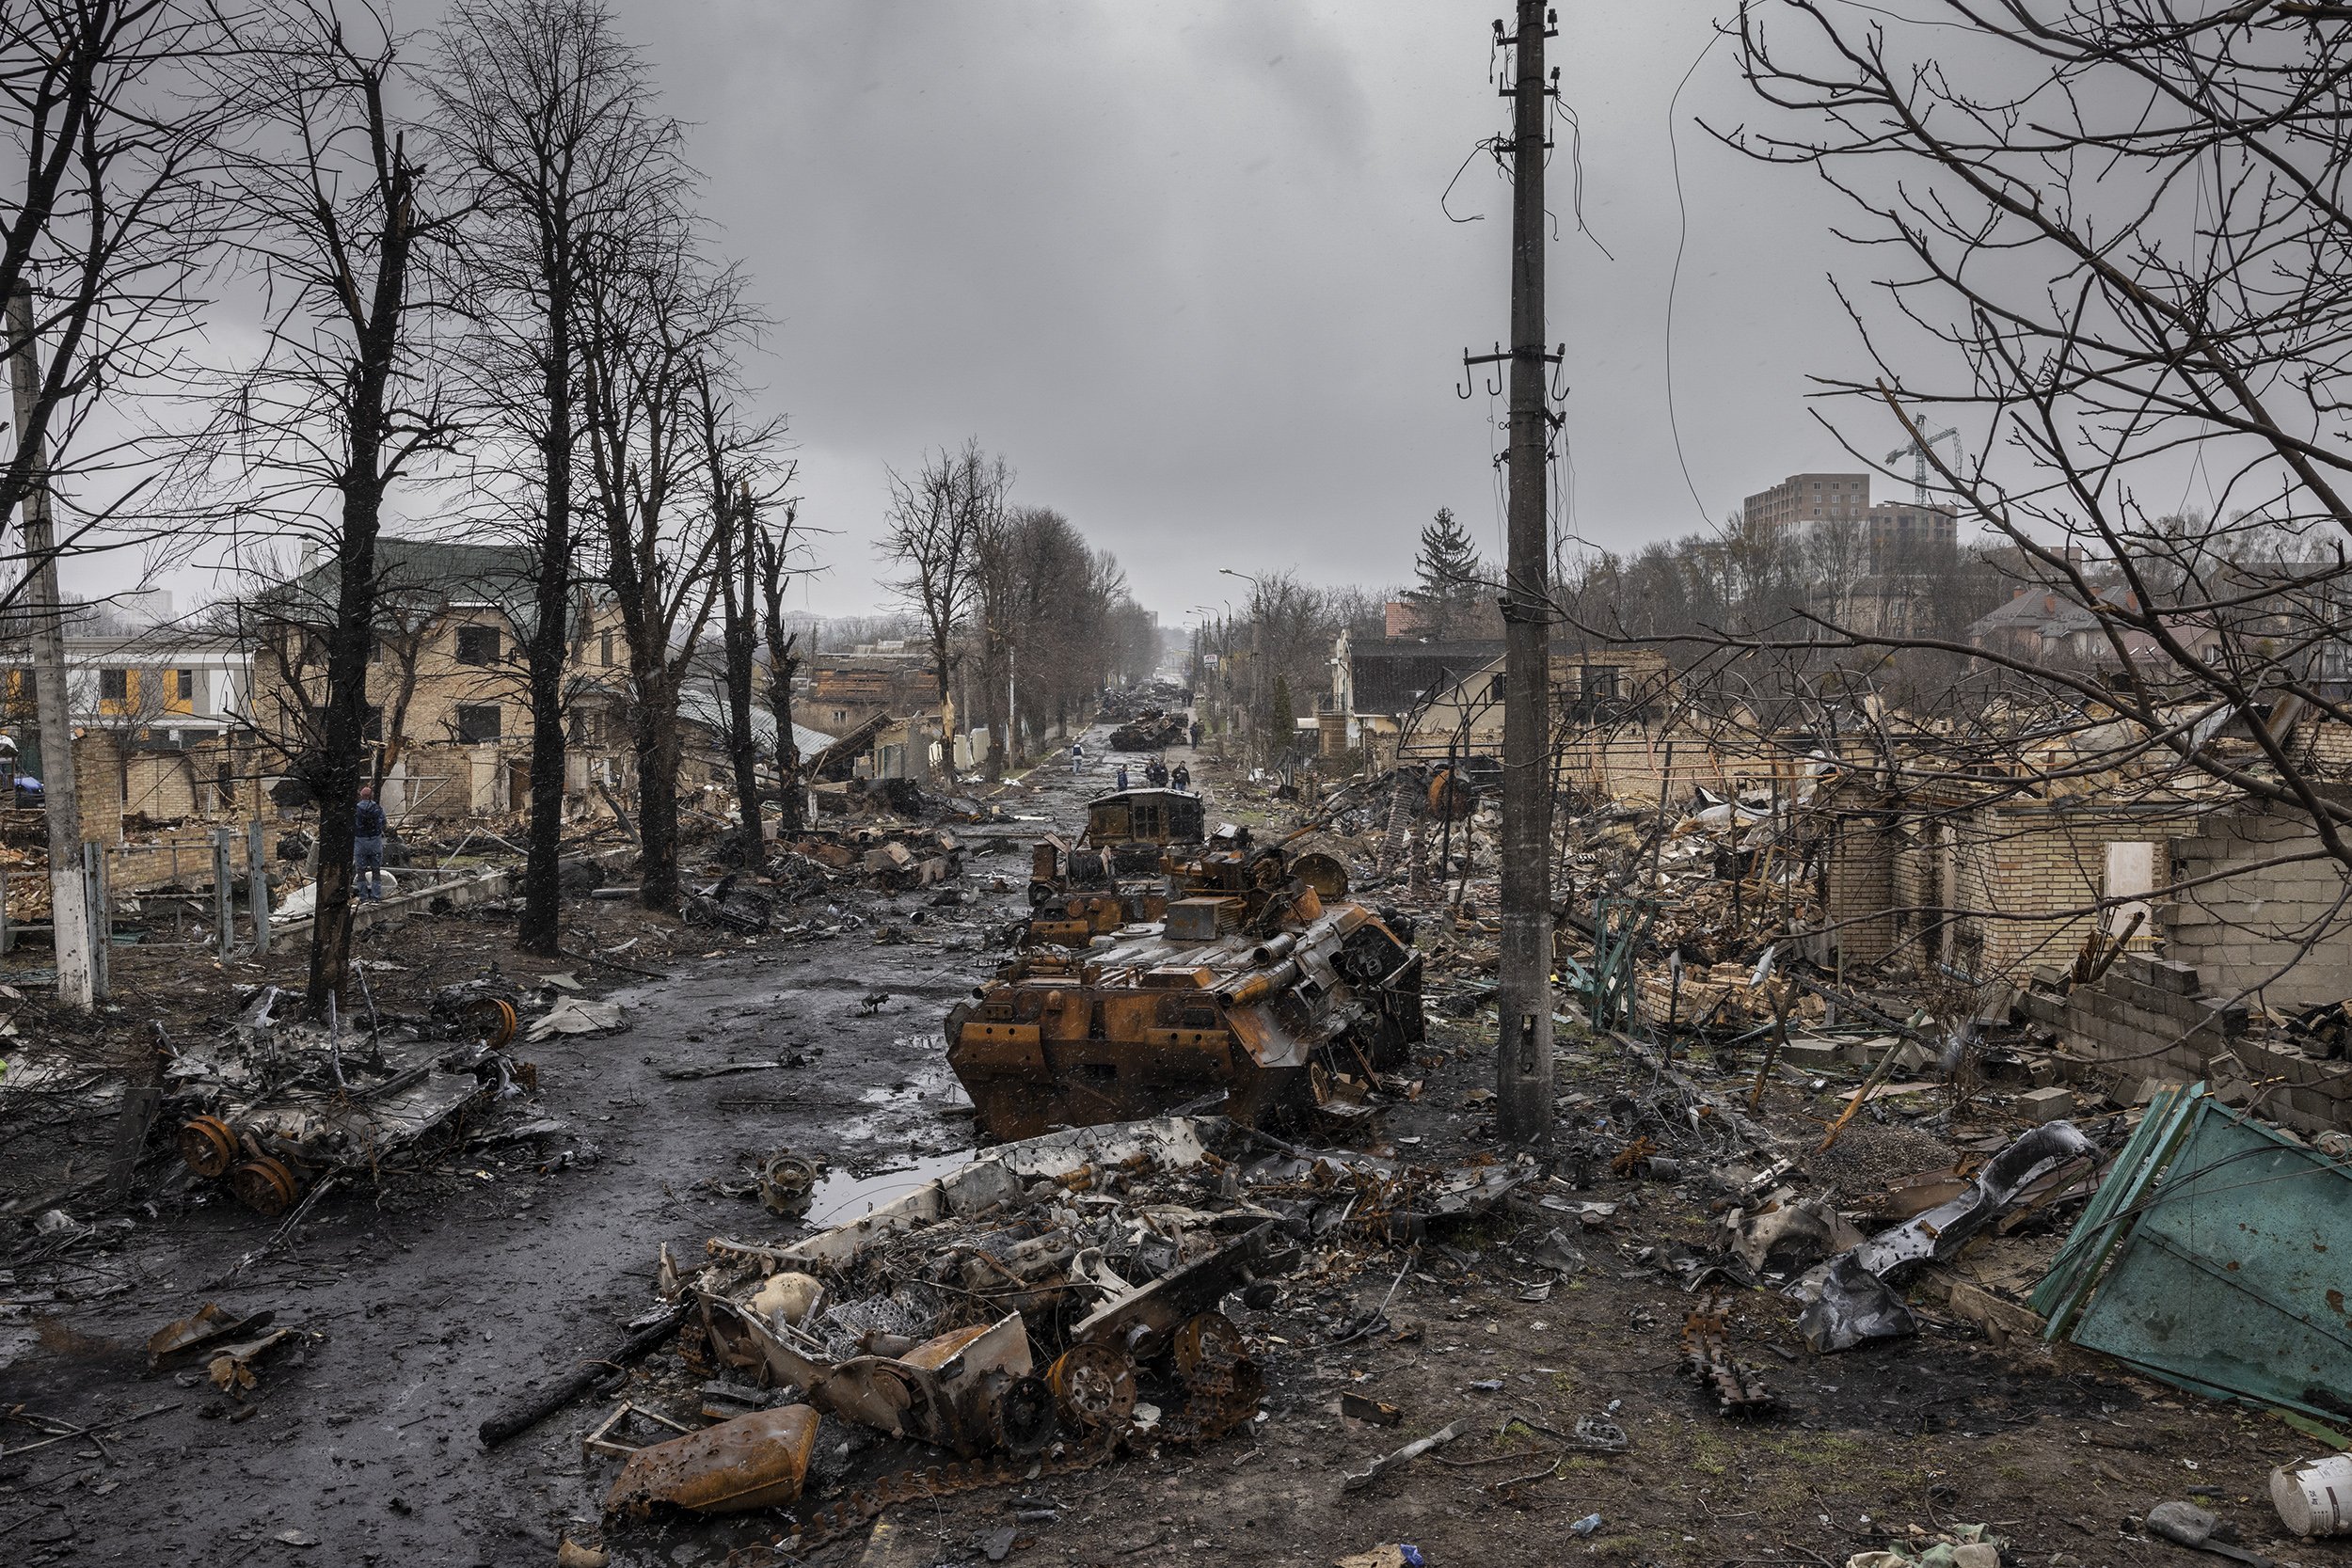  The remnants of a destroyed Russian military column, that was hit by Ukrainian forces when Russian troops initially entered the town of Bucha, was seen in the initial days after the area was liberated. April, 2022. 